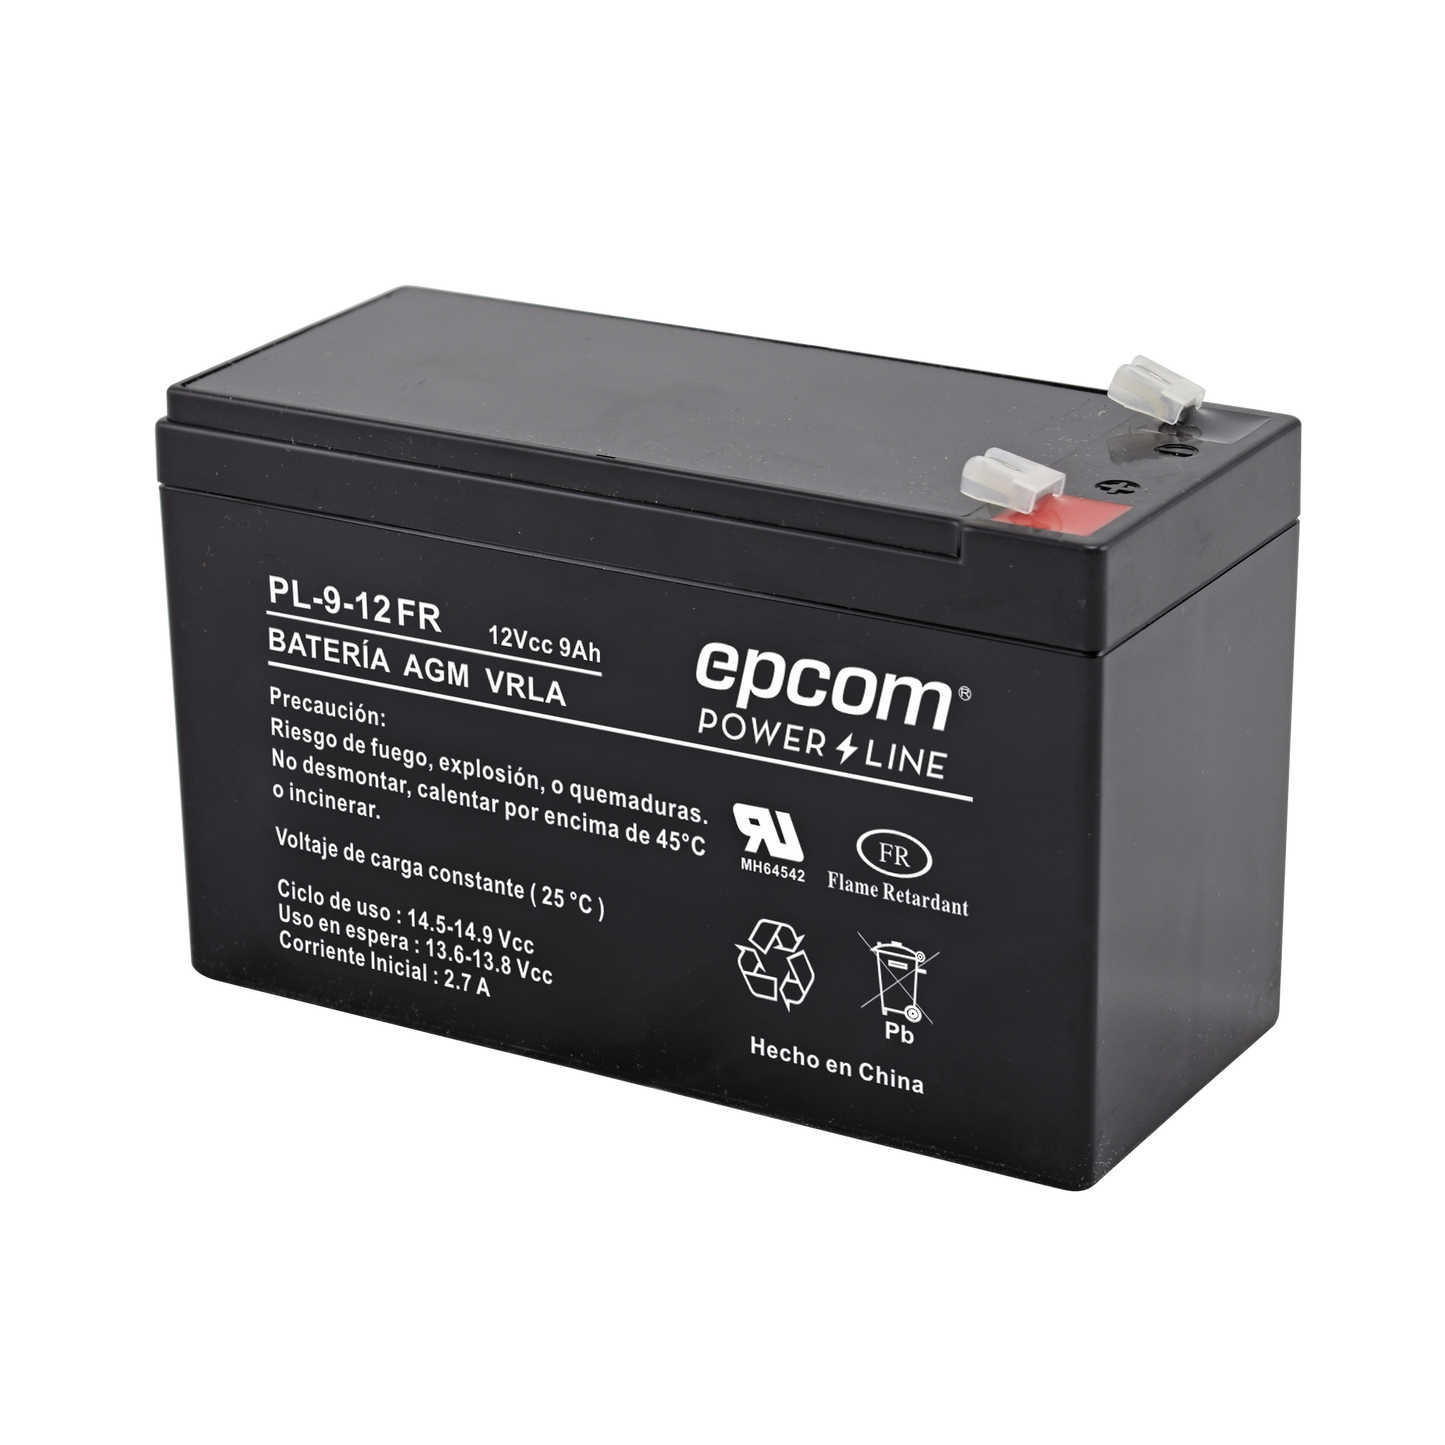 Backup battery / 12 V, 9 Ah / UL / AGM-VRLA technology / Flame retardant / For use in electronic equipment Intrusion alarms / Fire / Access control / Video Surveillance / F1 type terminals.